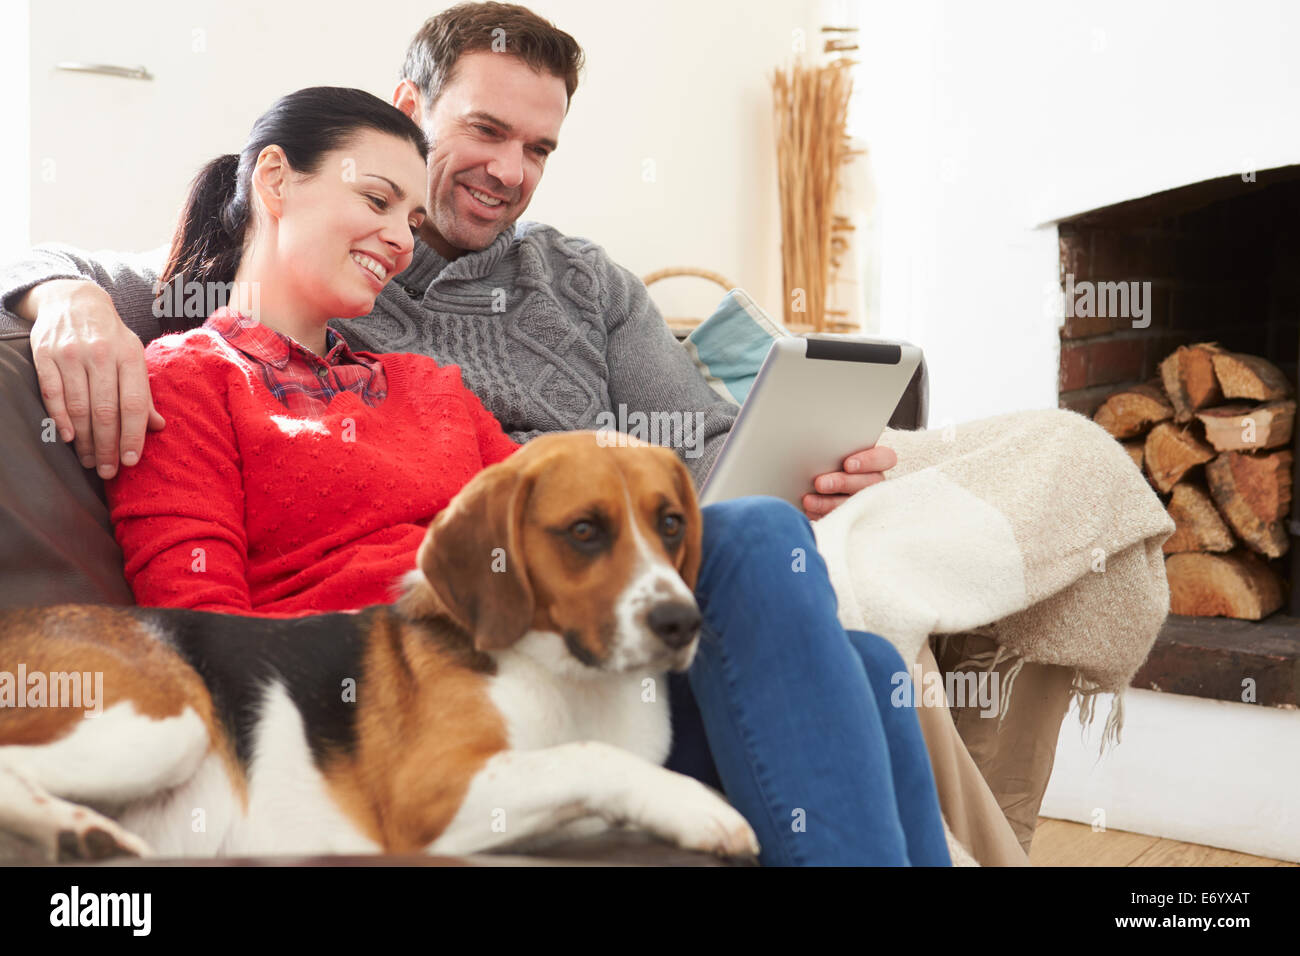 Couple At Home With Pet Dog Looking At Digital Tablet Stock Photo